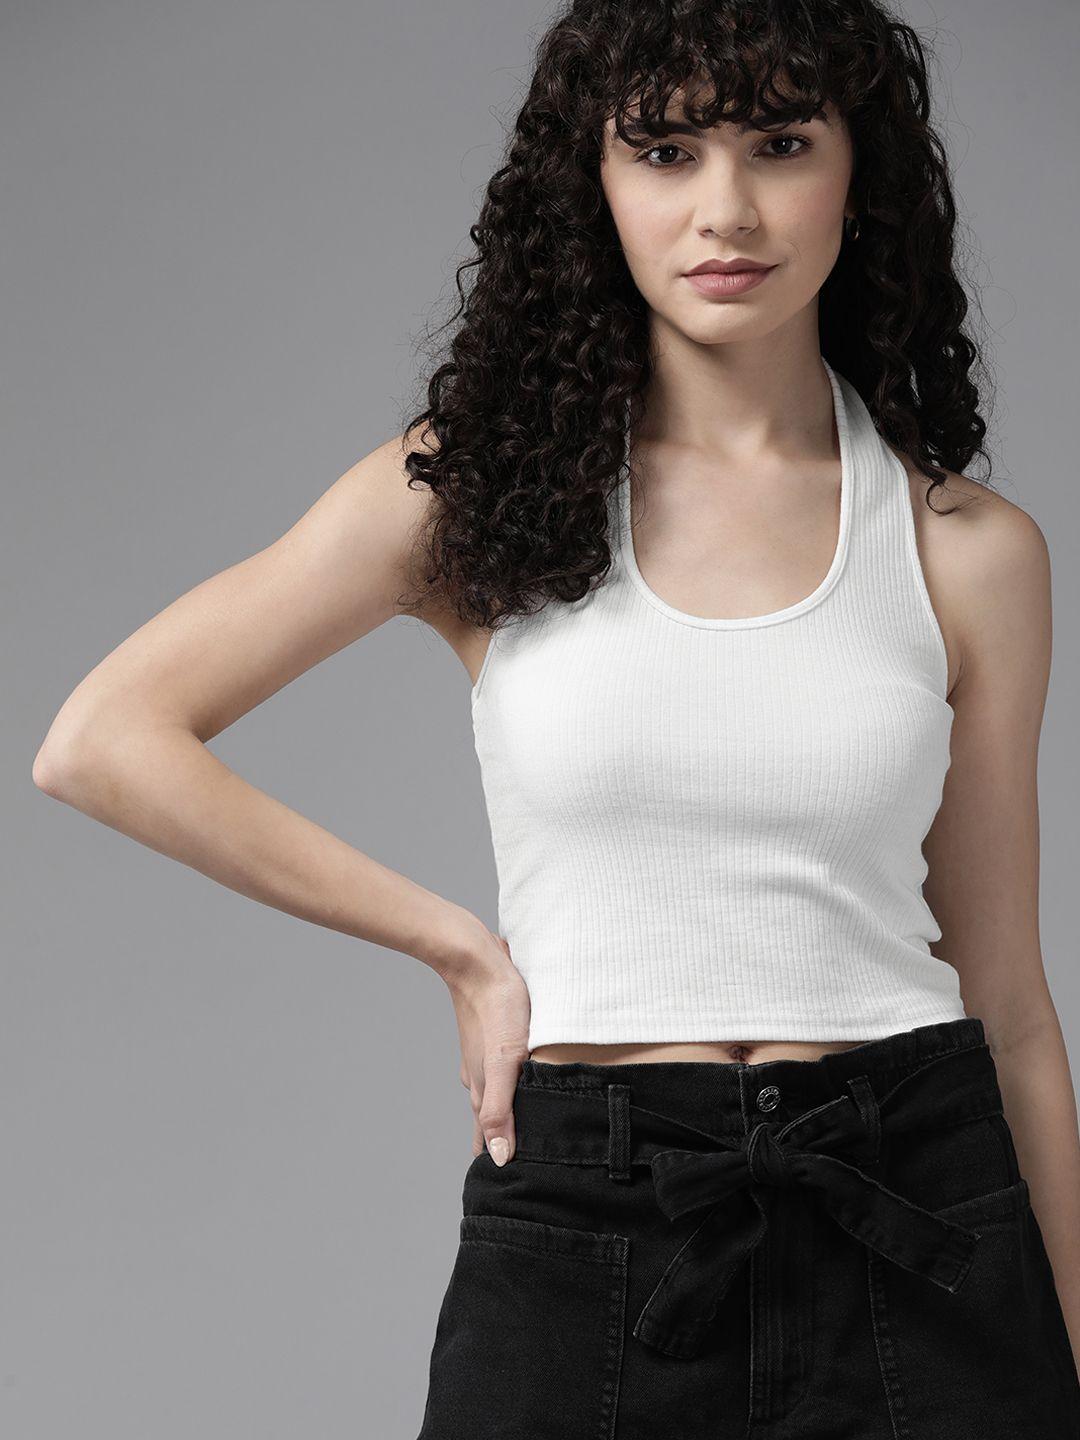 the-roadster-lifestyle-co.-halter-neck-solid-top